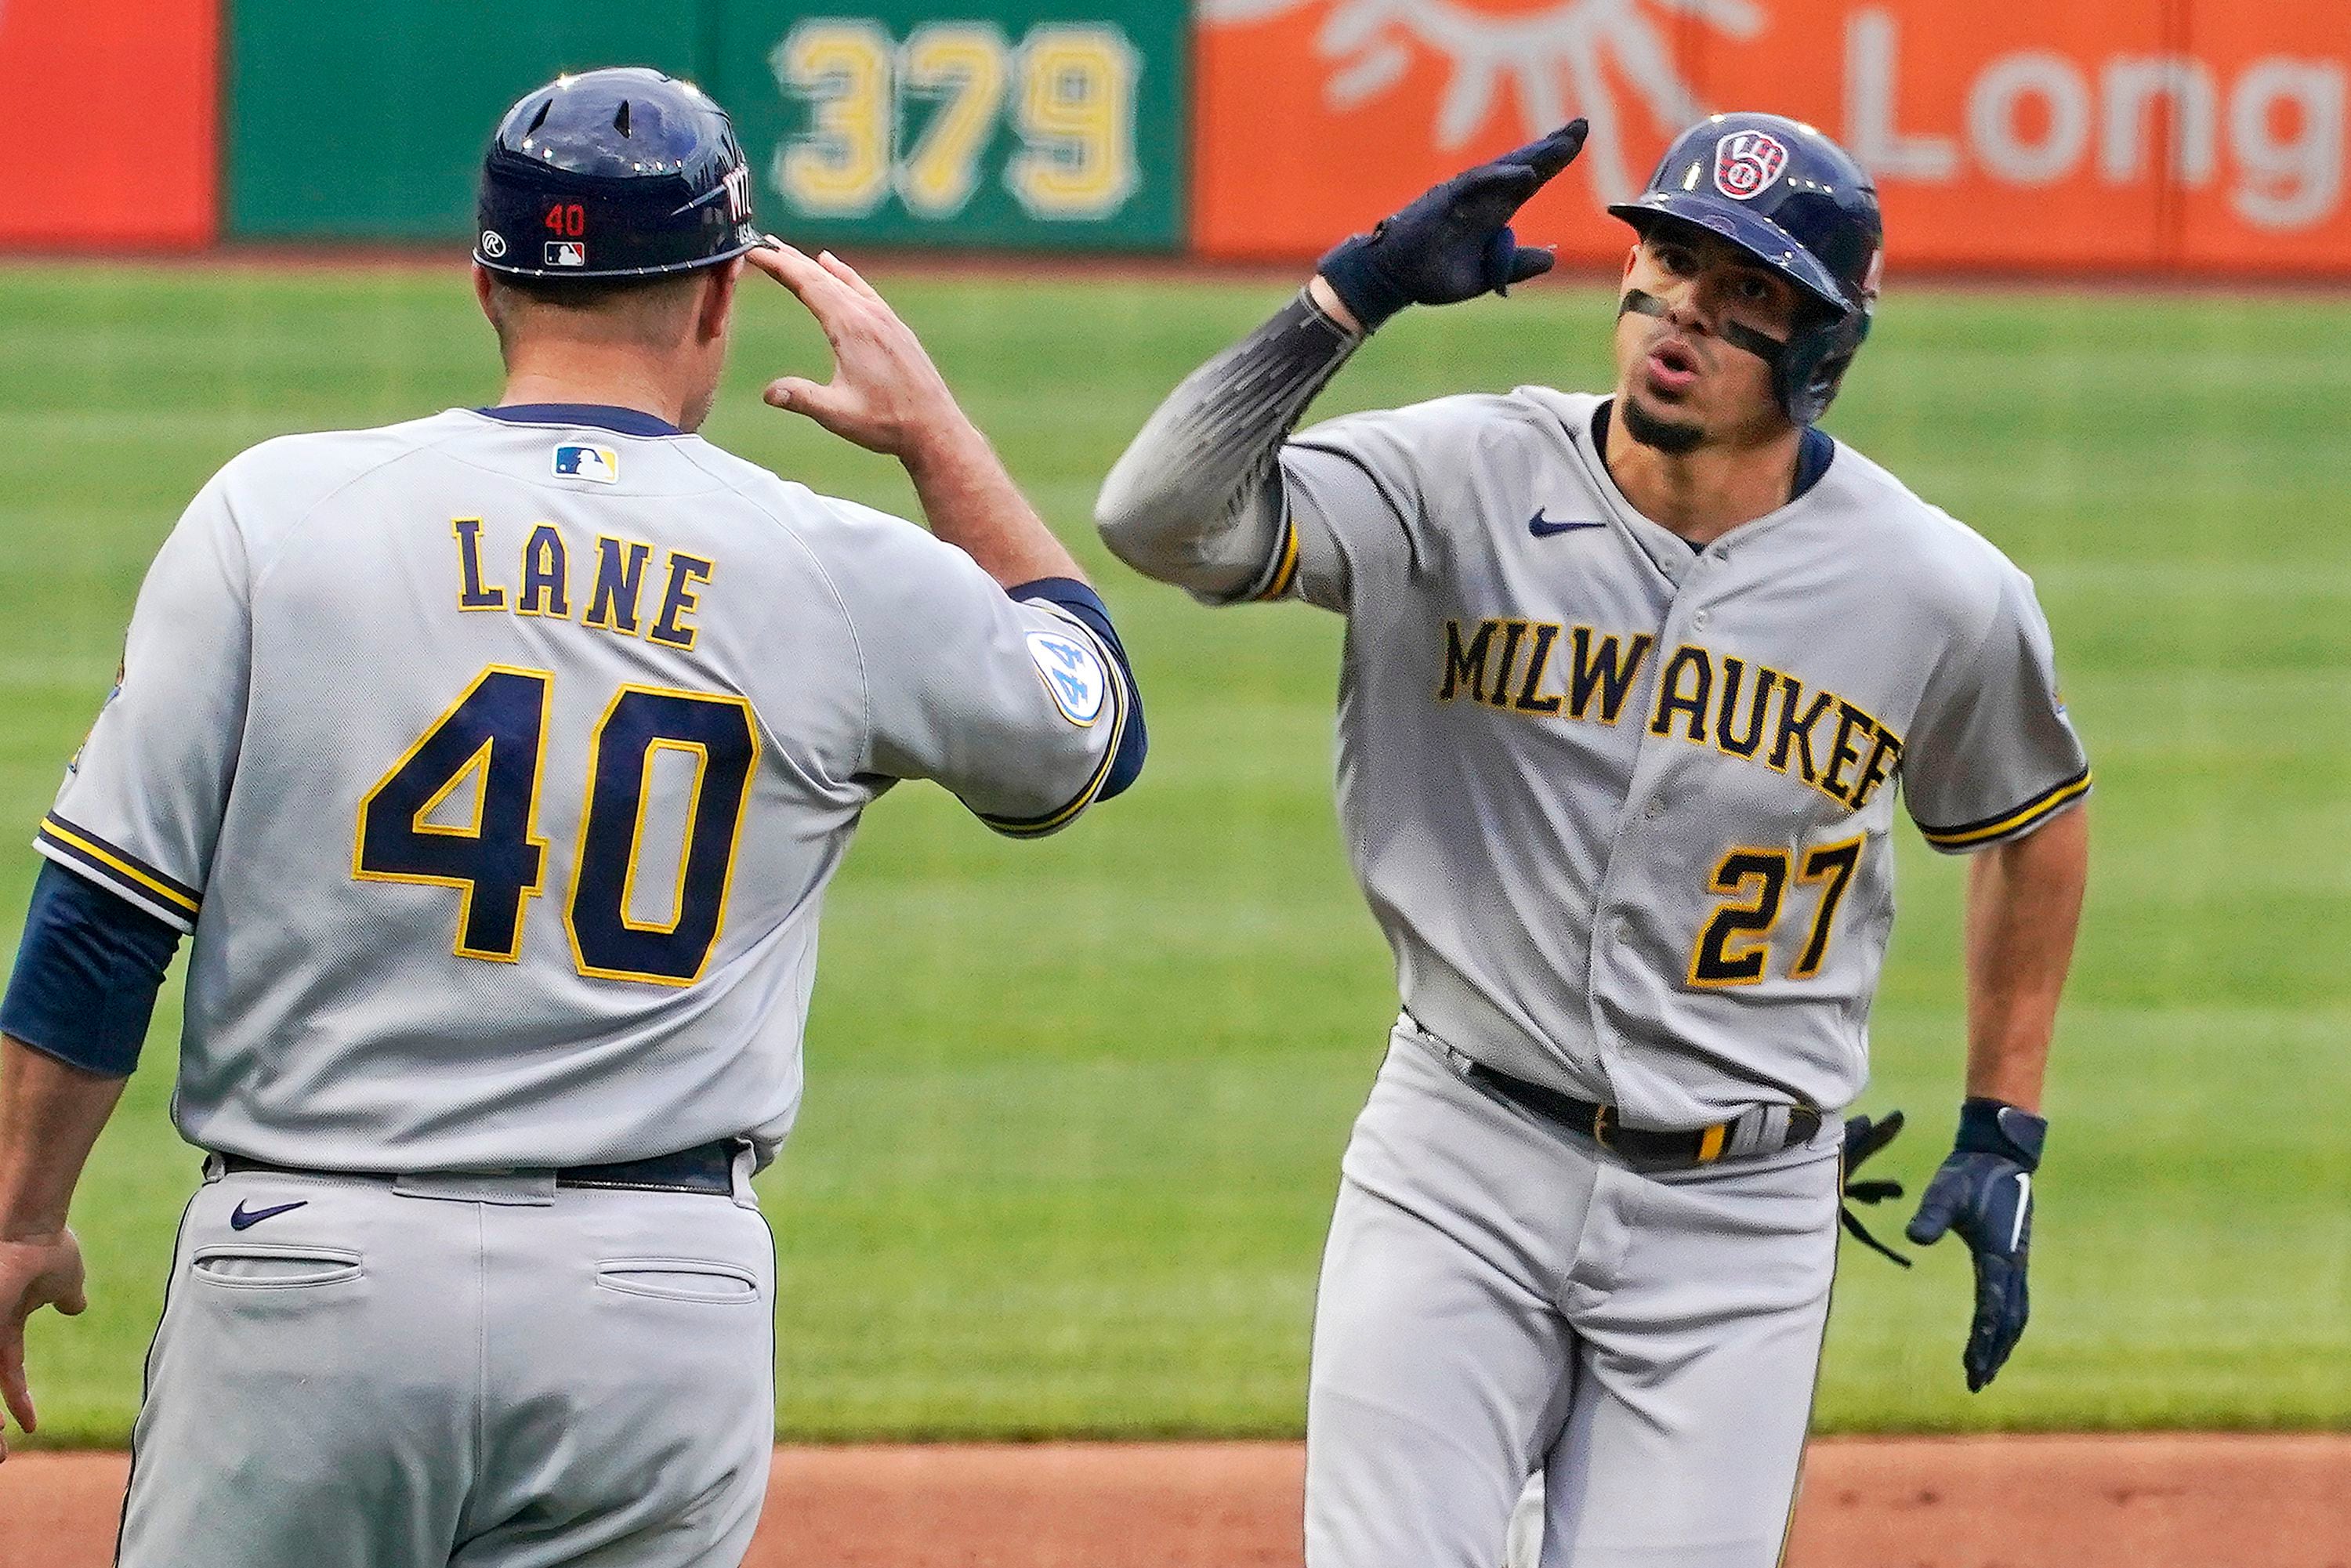 Brewers run win streak to 10 with 7-2 victory over Pirates